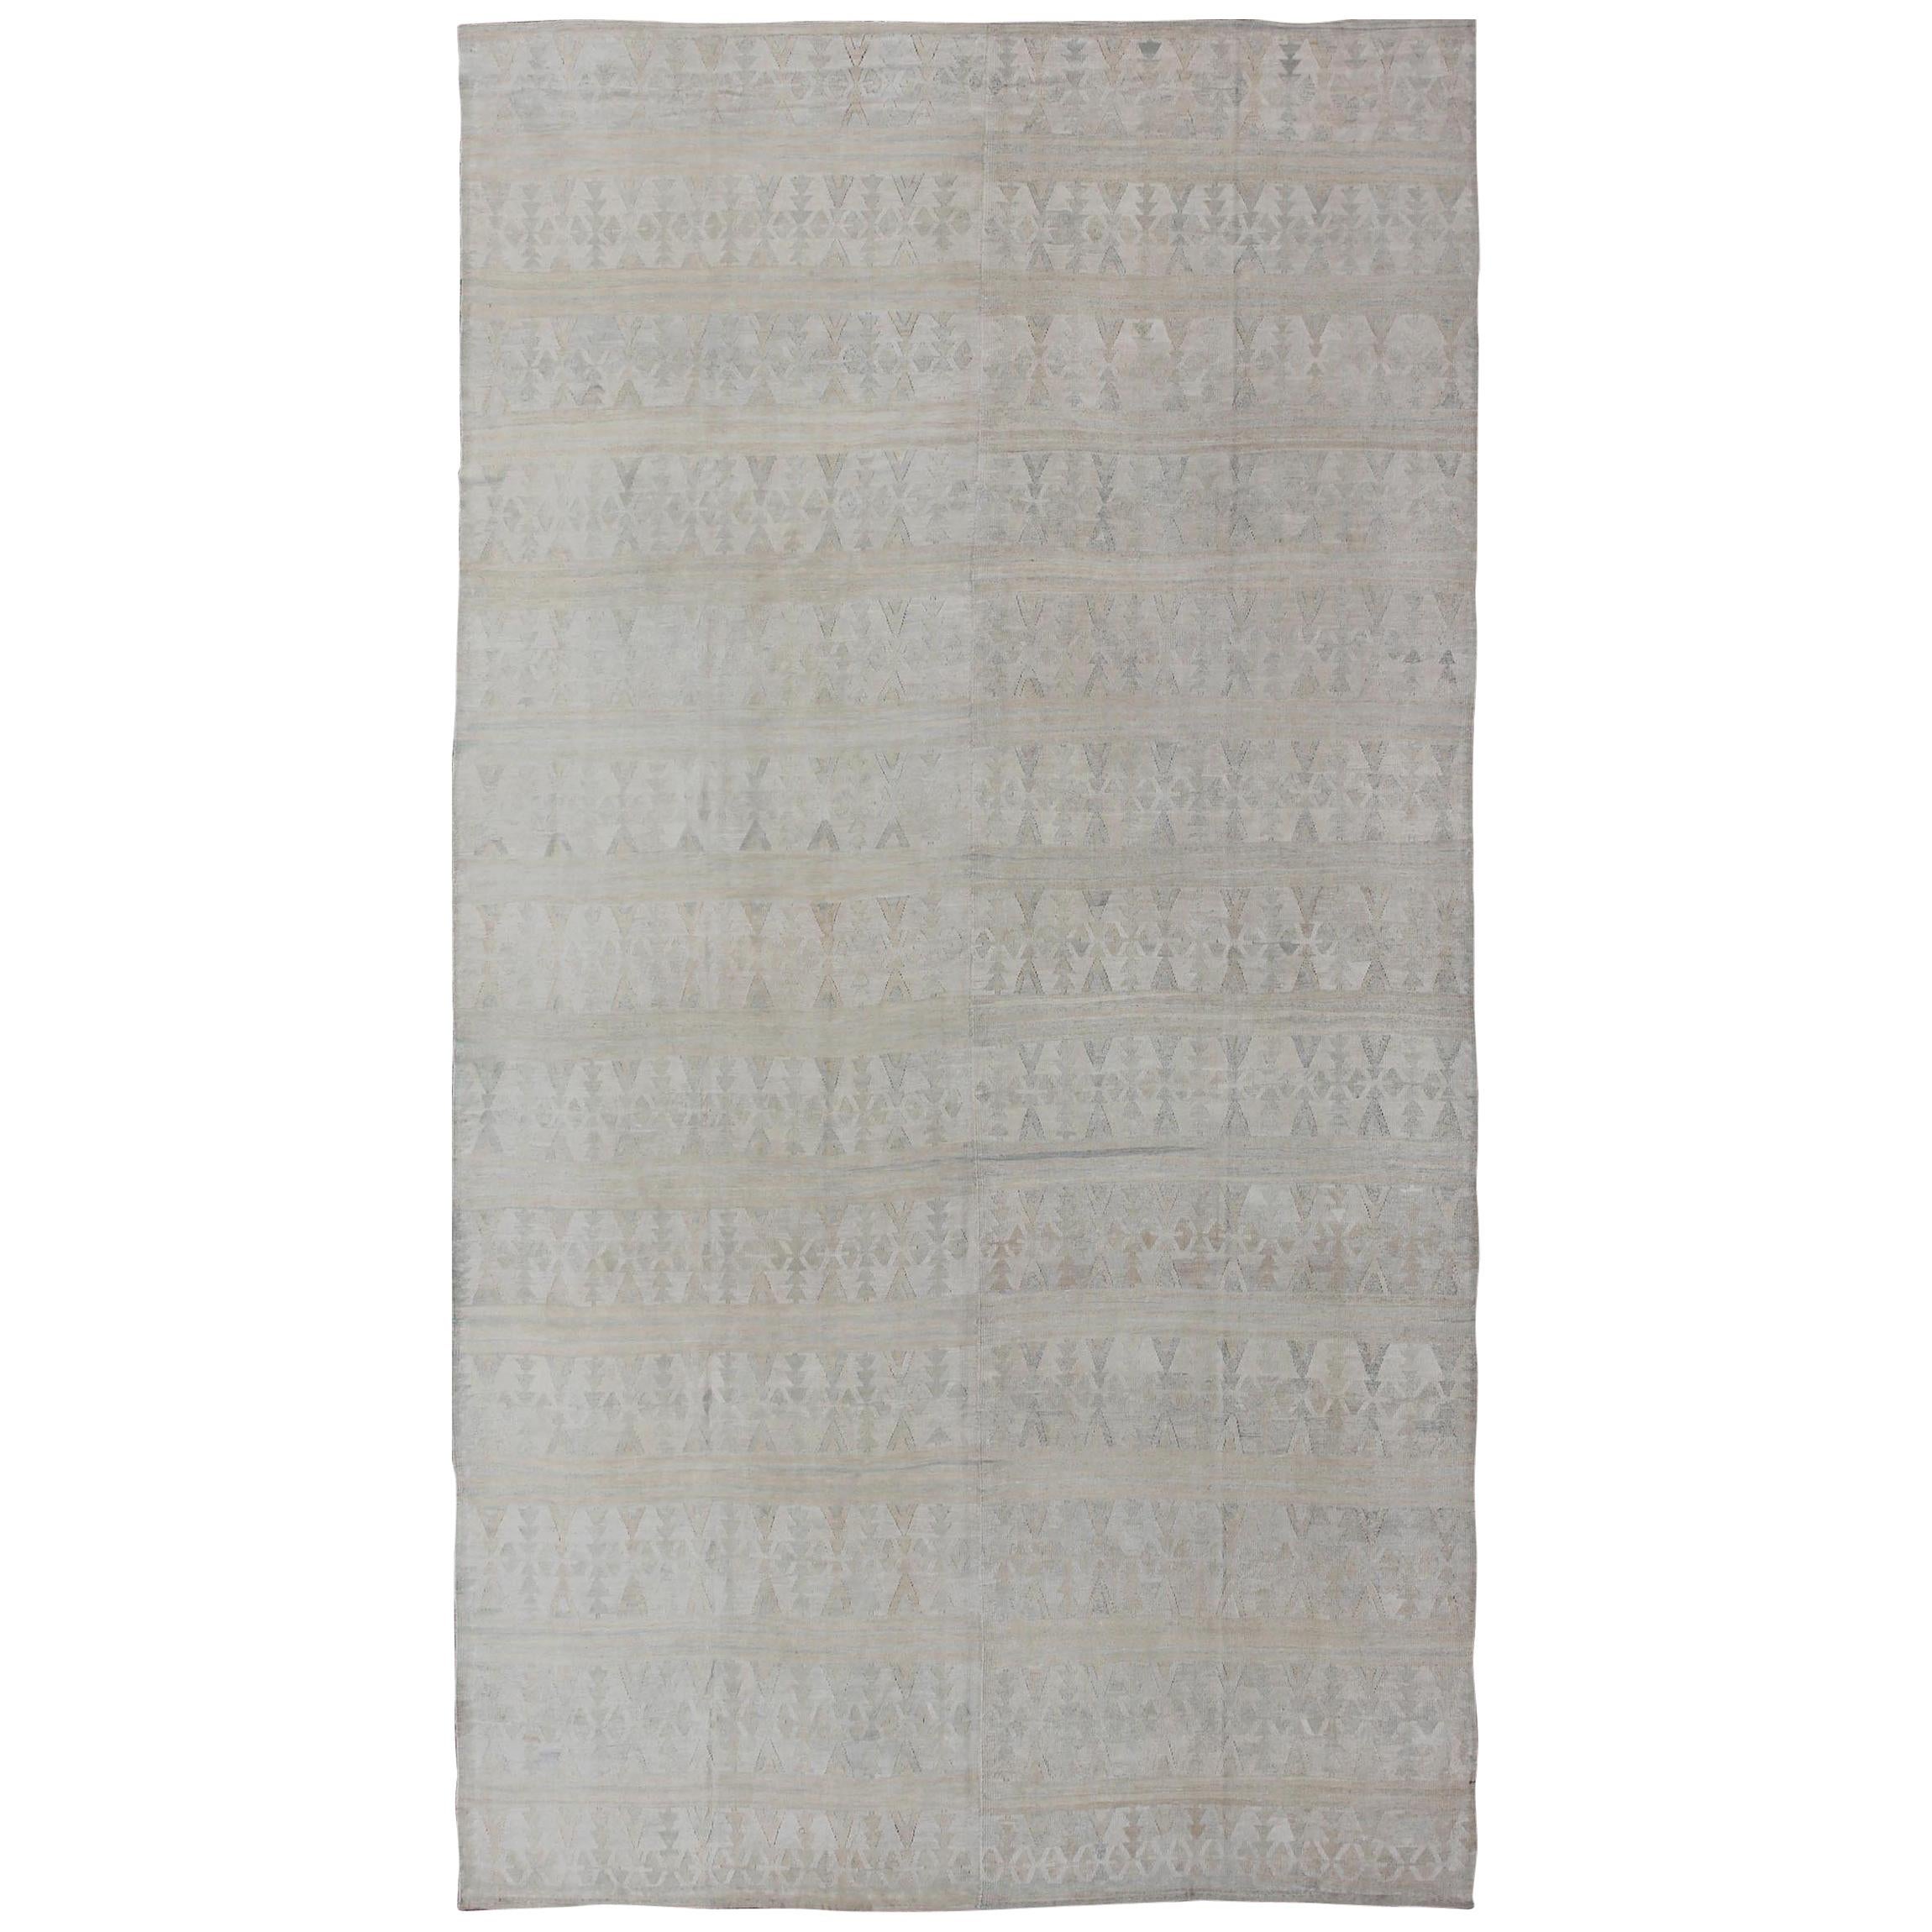 Shades of Cream Long Vintage Turkish Kilim Rug with All-Over Design For Sale